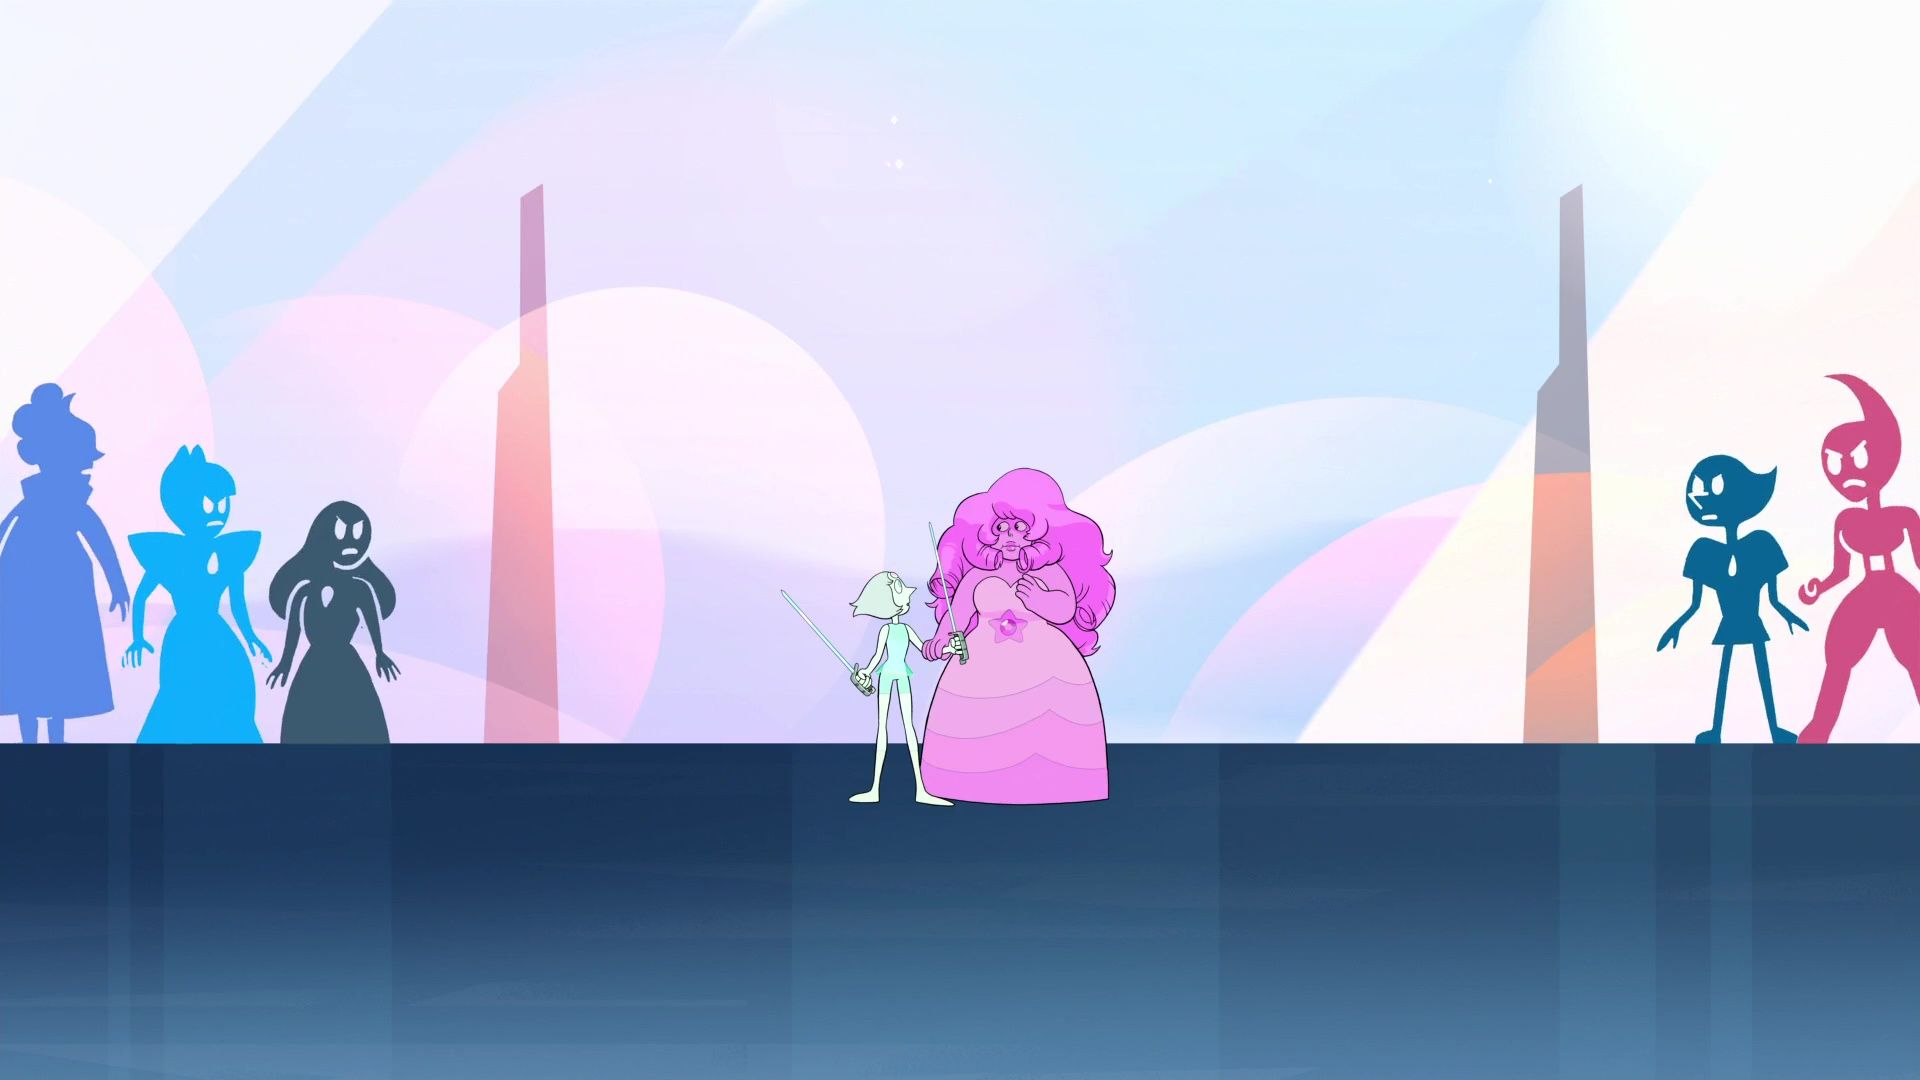 Theory Pearl shattered Pink Diamond while disguised as Rose Quartz